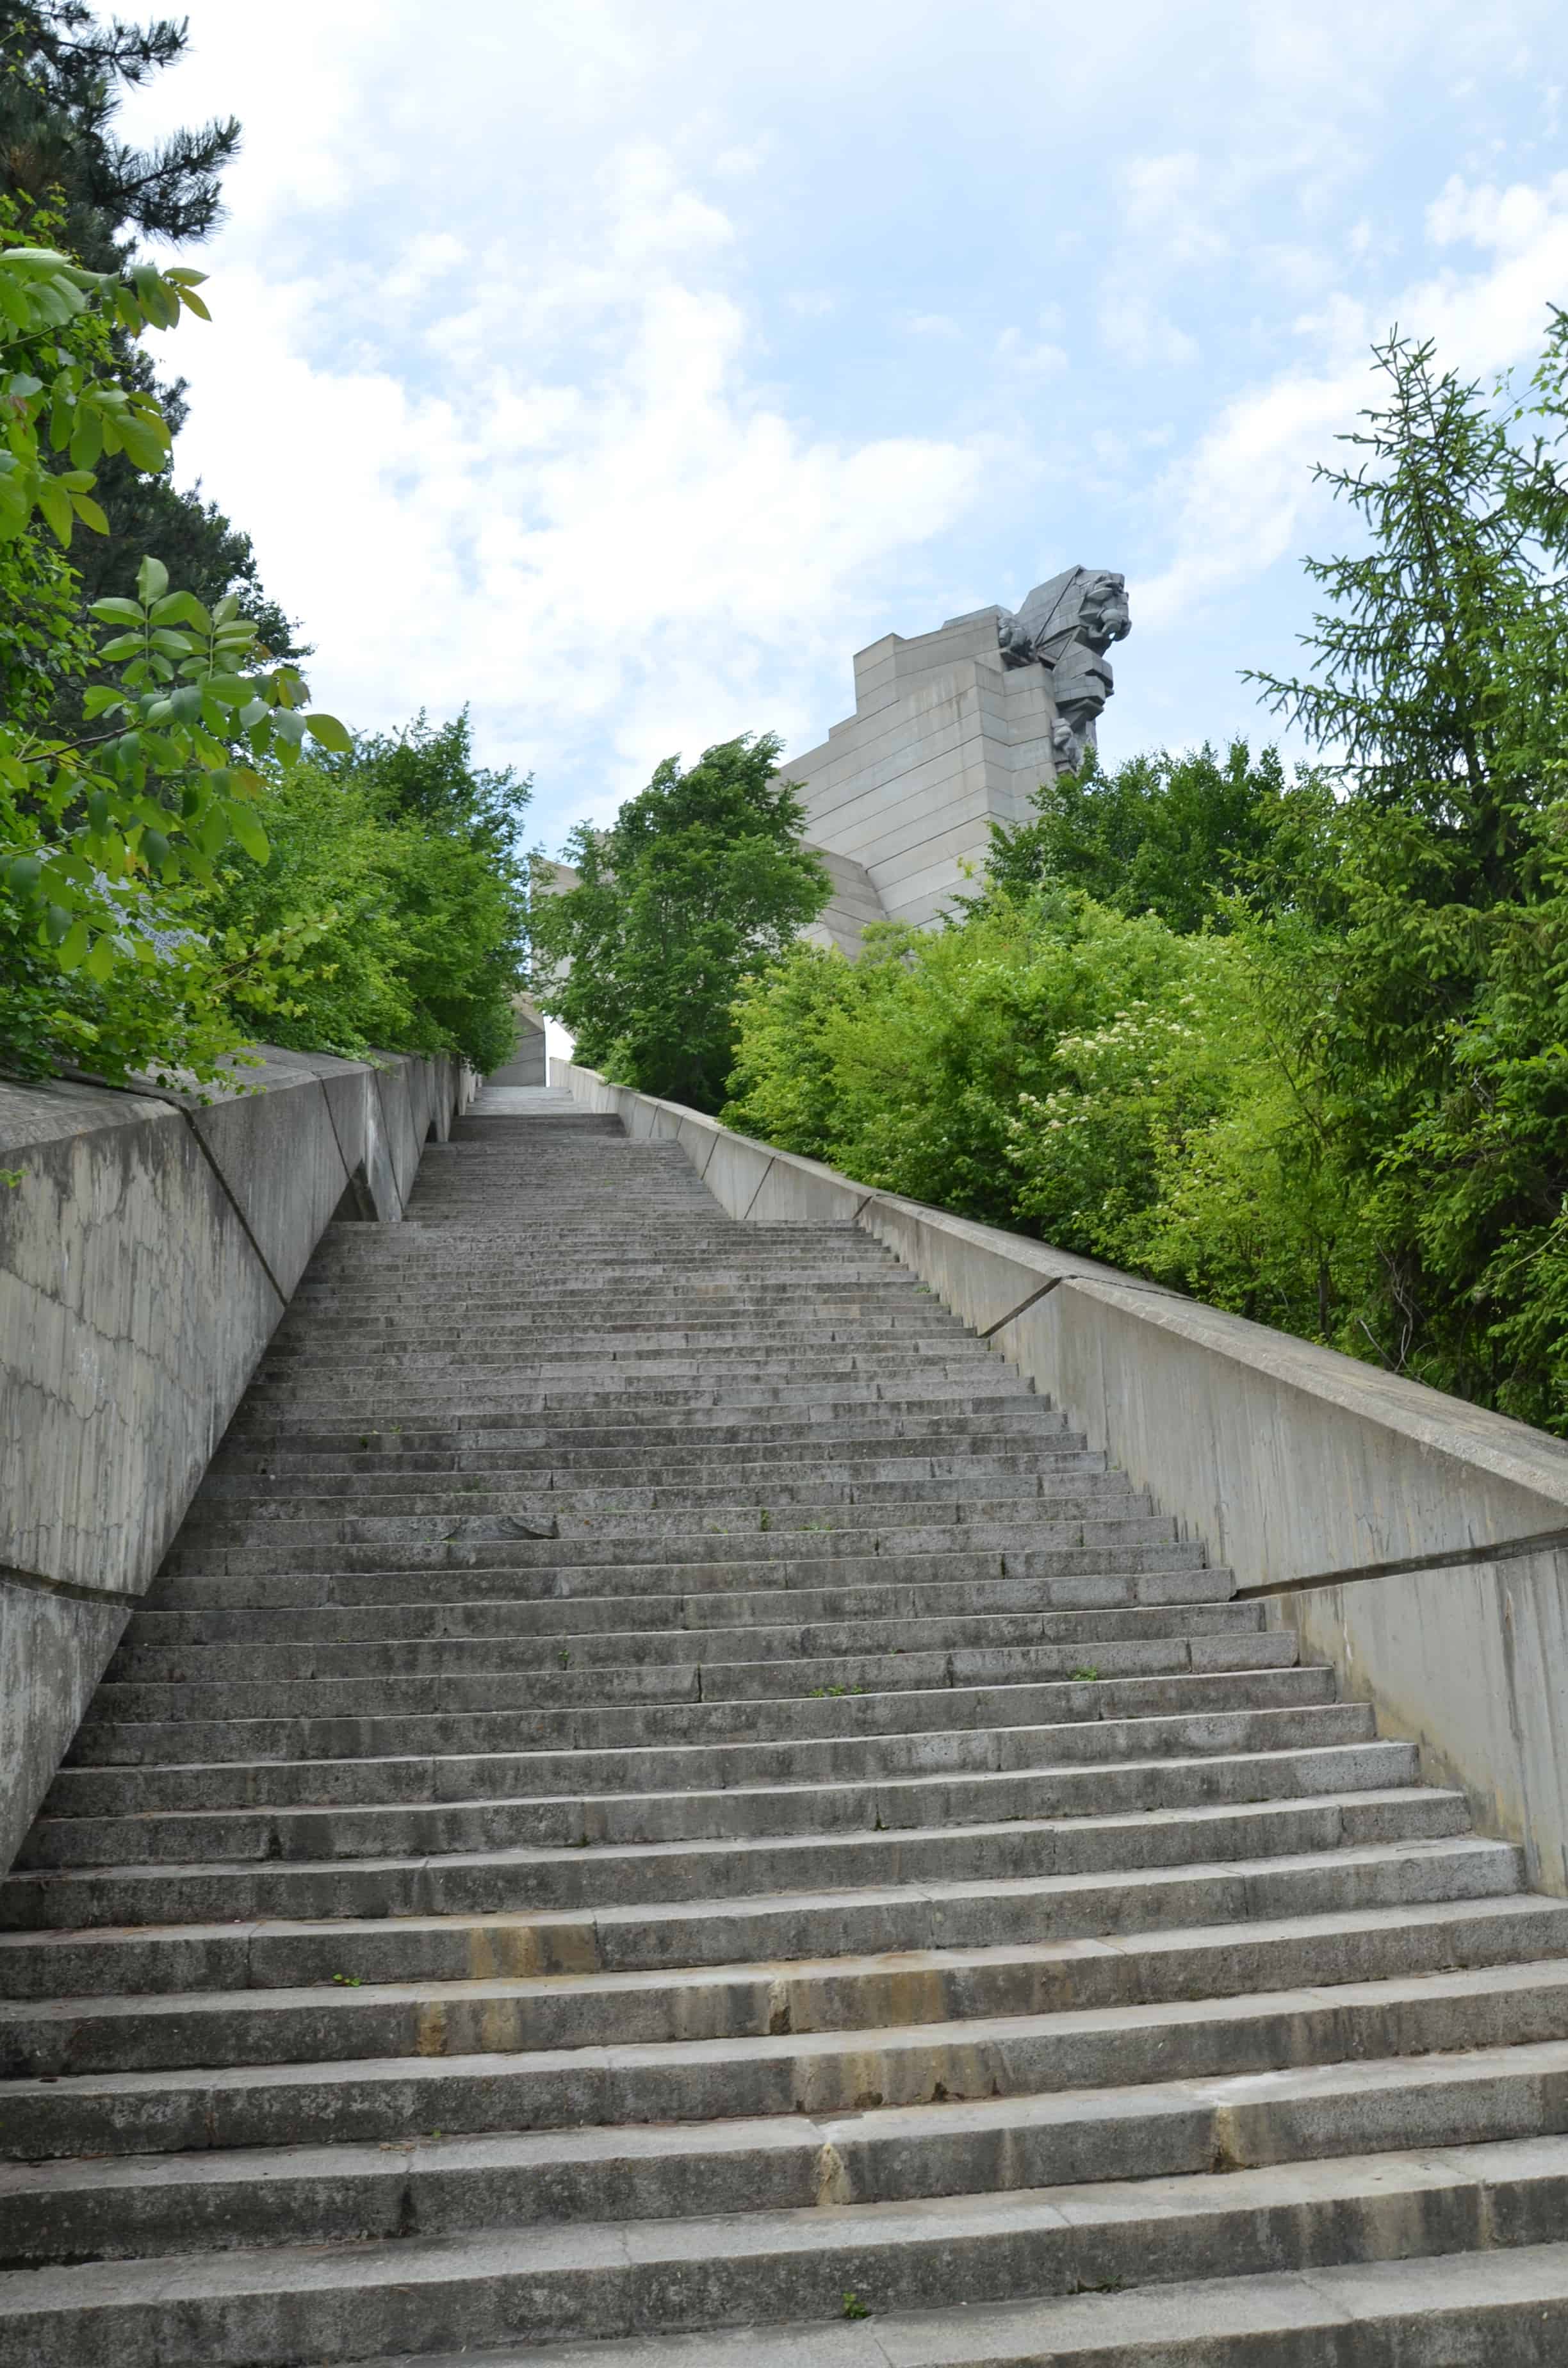 The steps up to the Founders of the Bulgarian State Monument in Shumen, Bulgaria